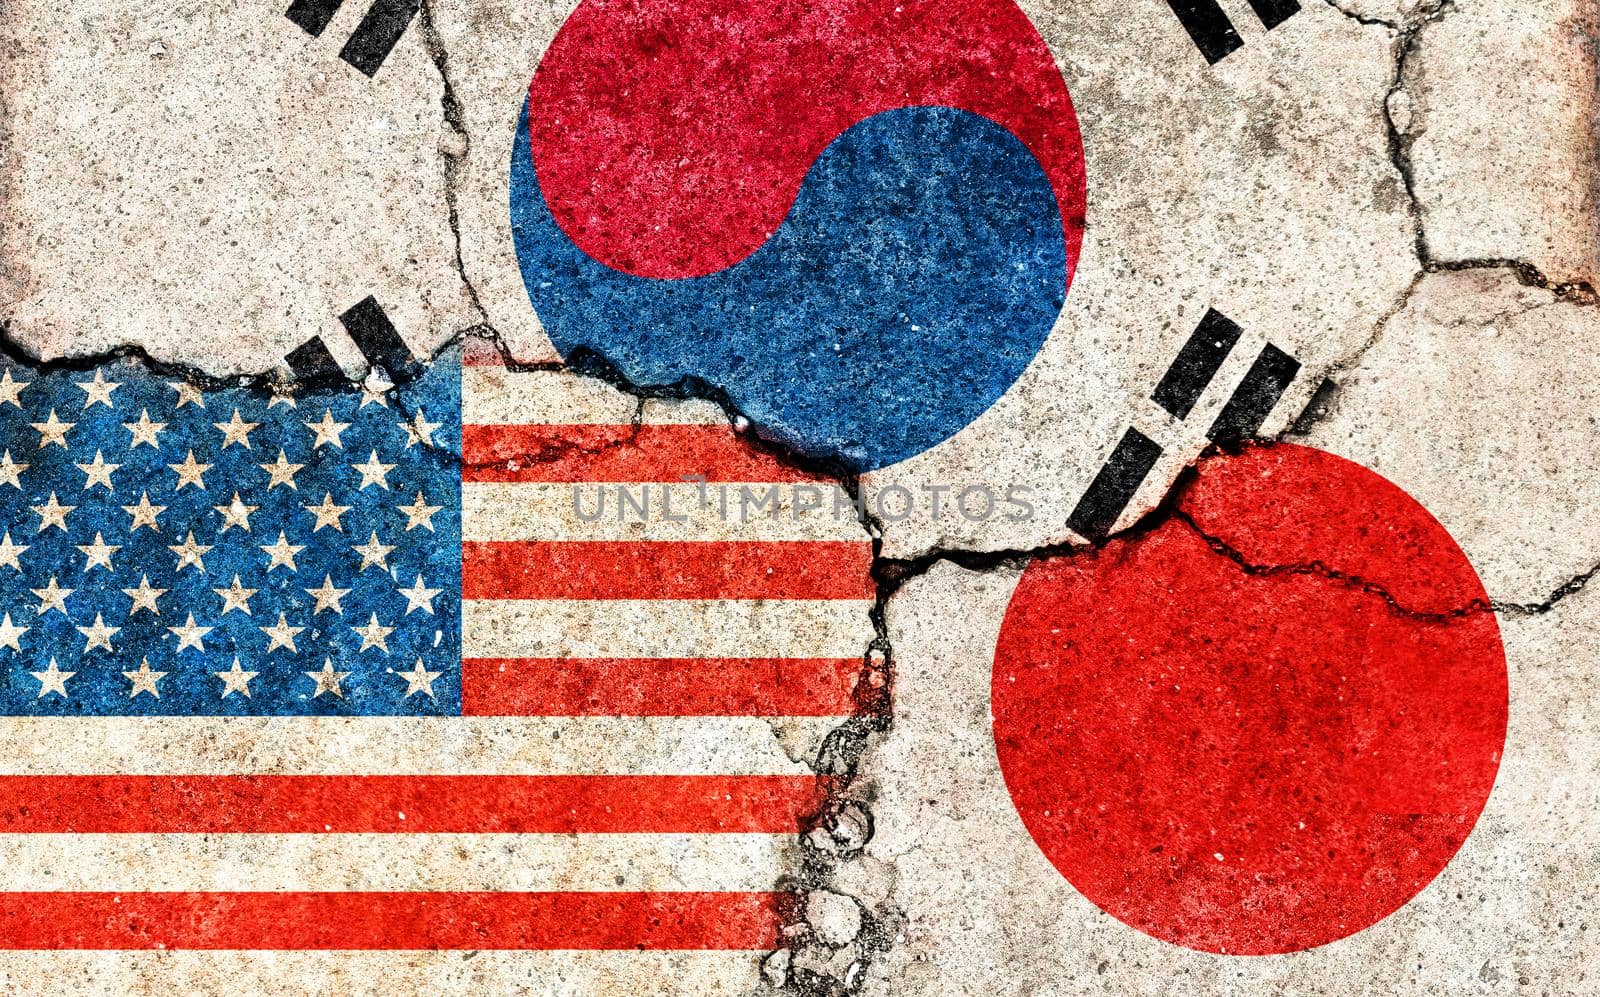 Grunge flags illustration of three countries with conflict and political problems (cracked concrete background) | USA, Japan and South korea